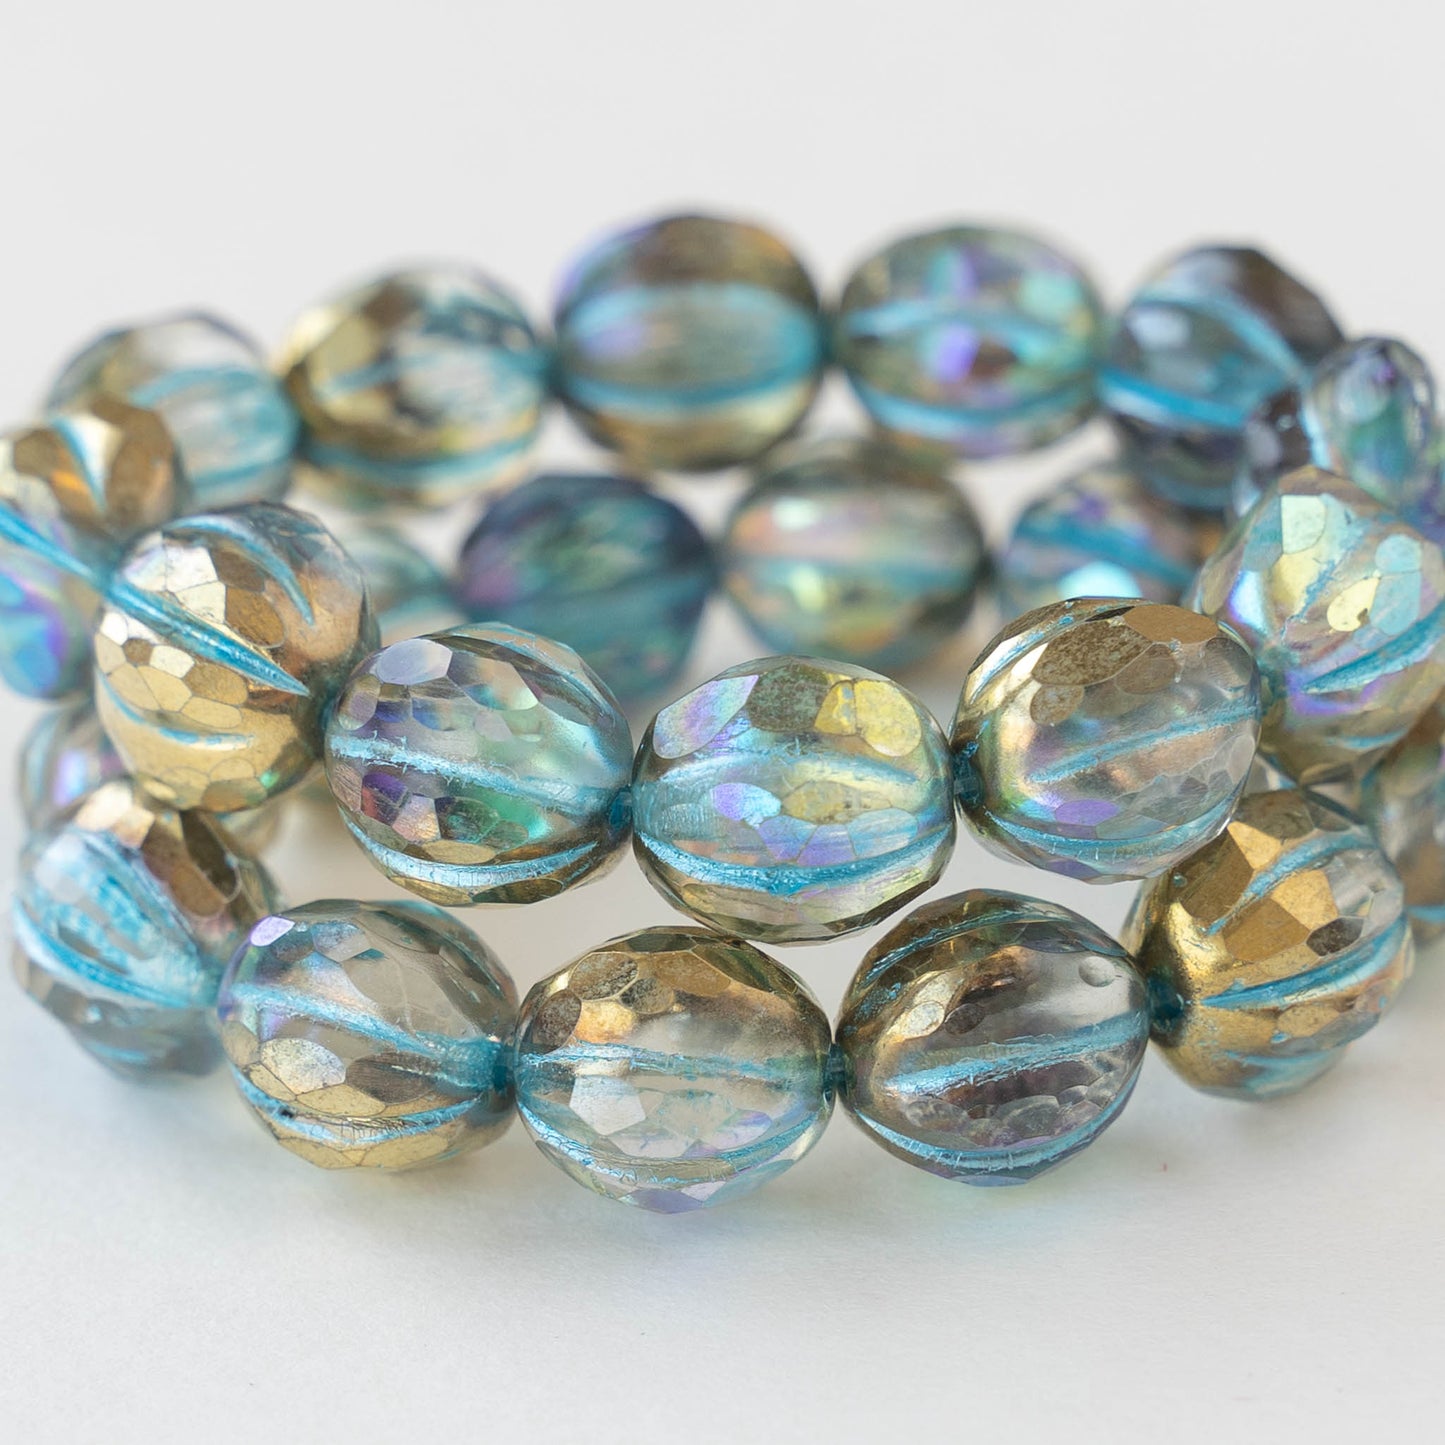 10mm Faceted Round Melon Beads - Transparent Glass with Gold Luster and Turquoise - 12 beads